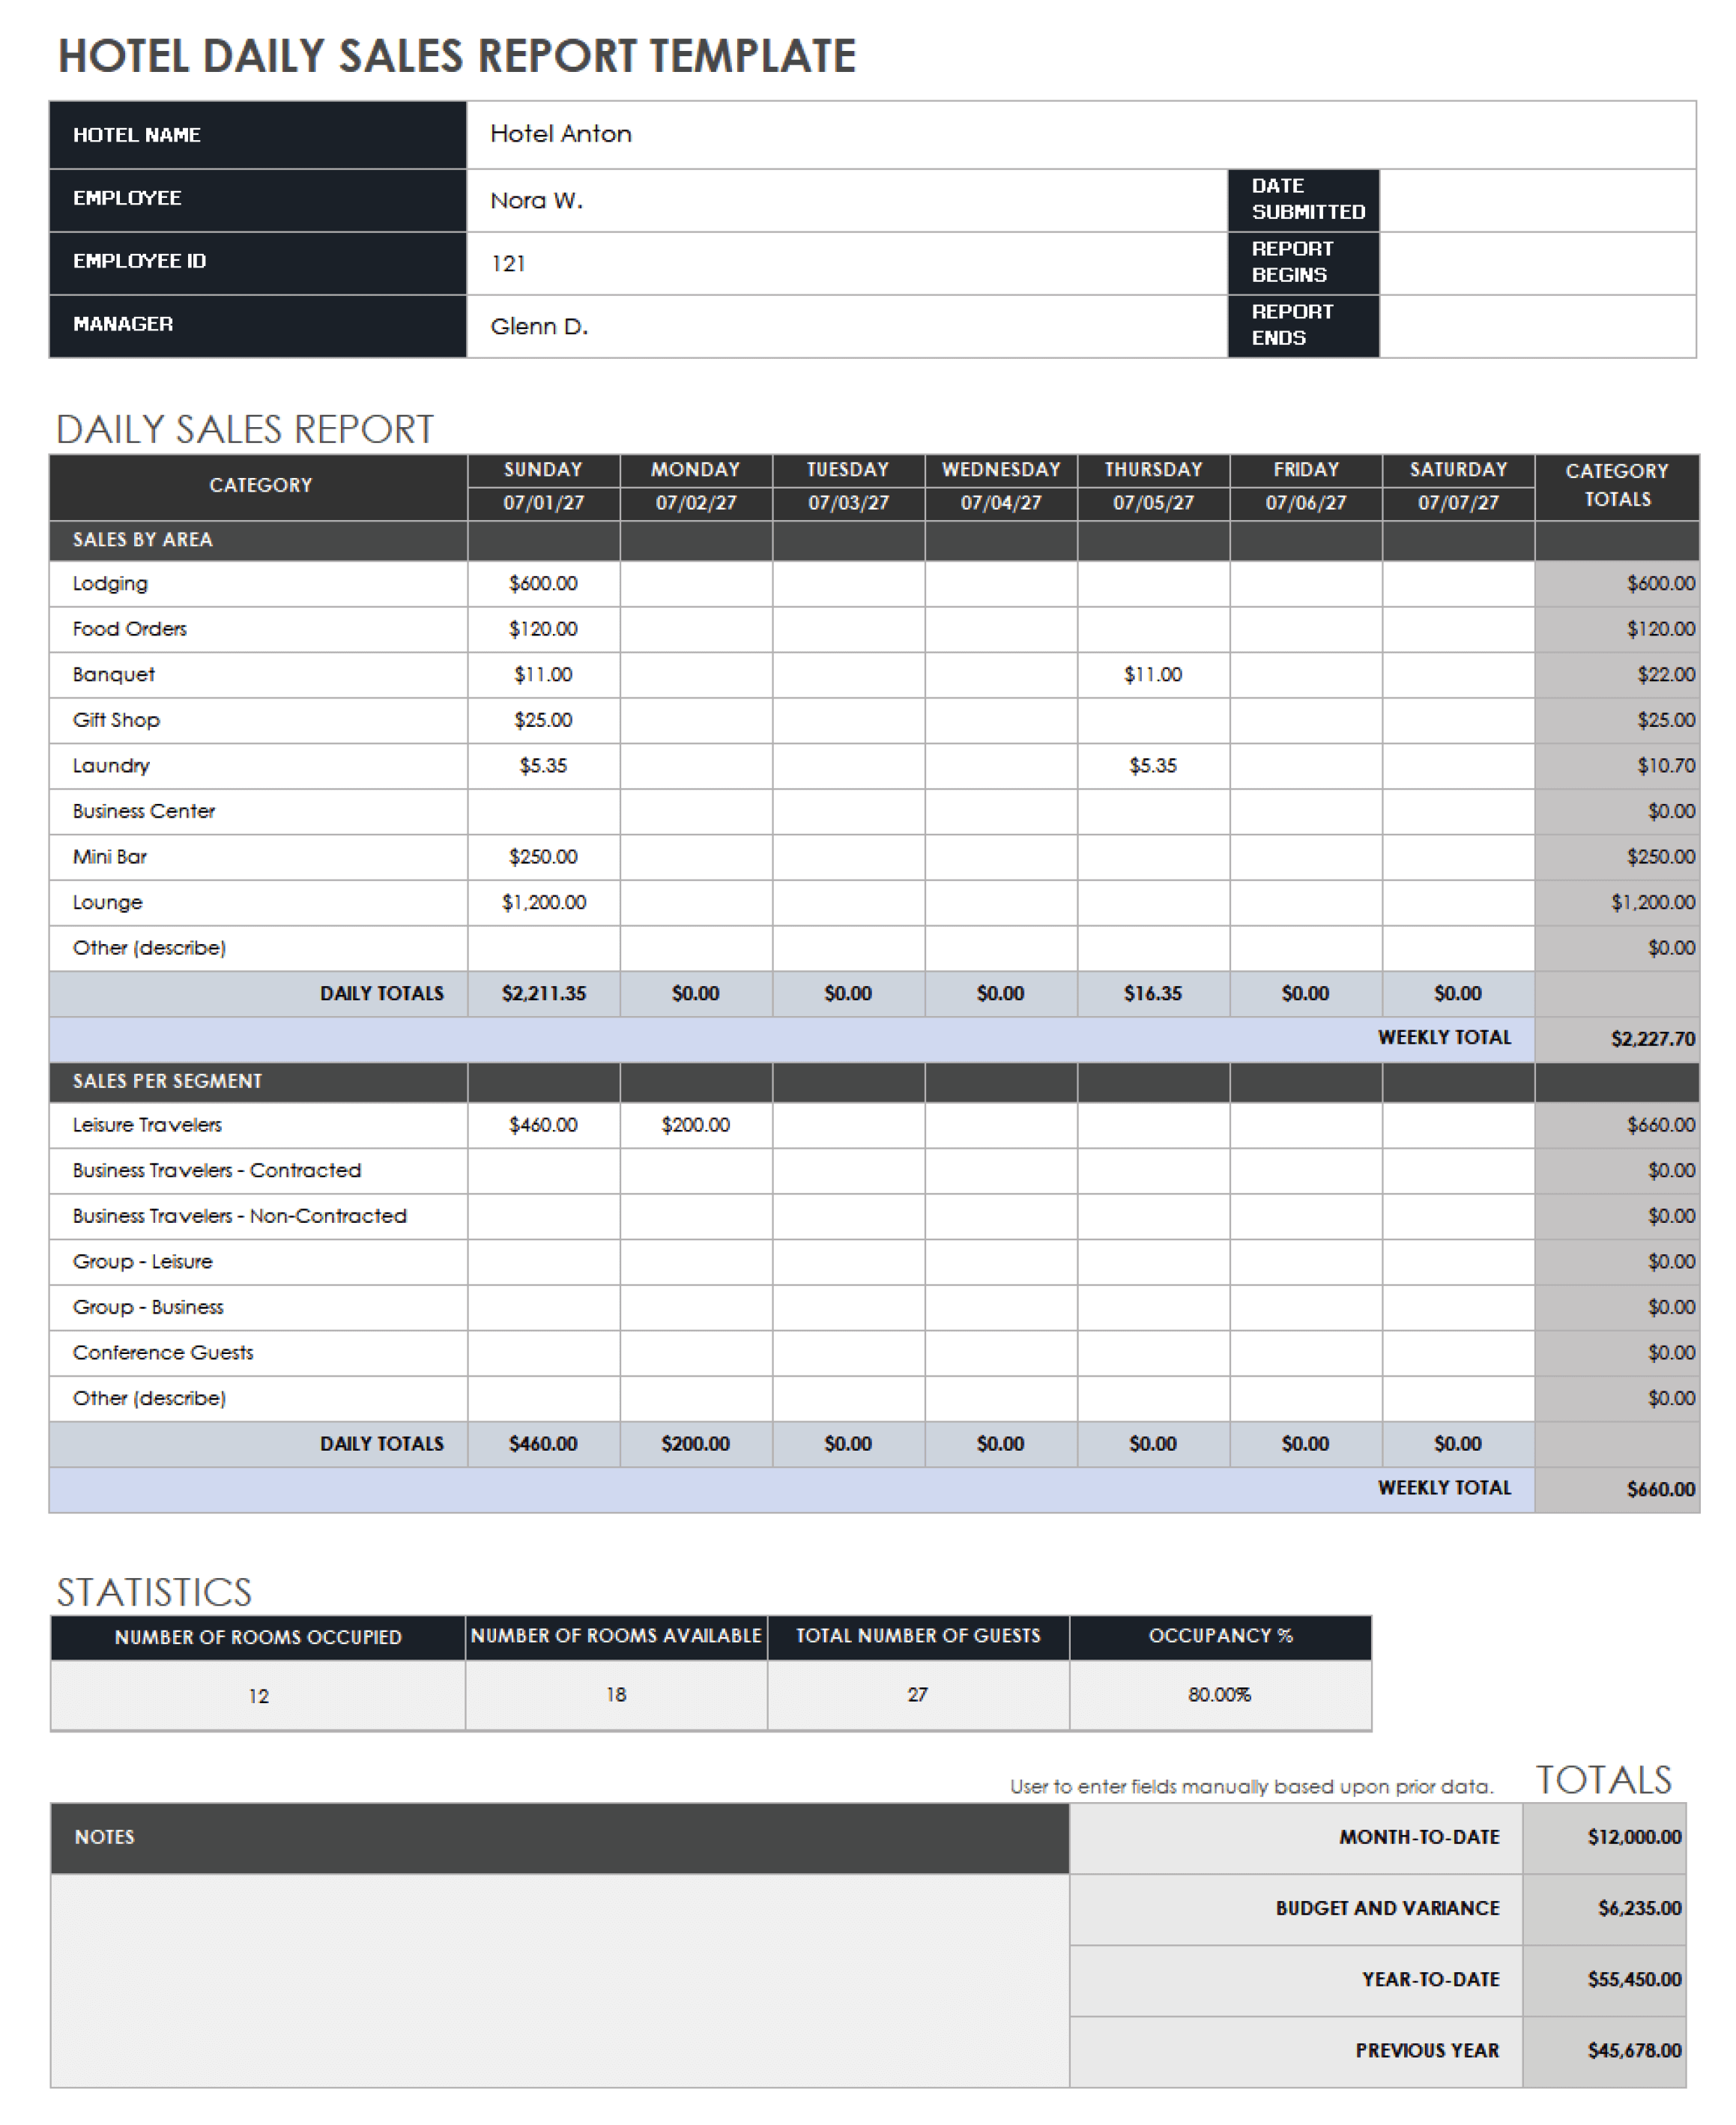 Hotel Daily Sales Report Template